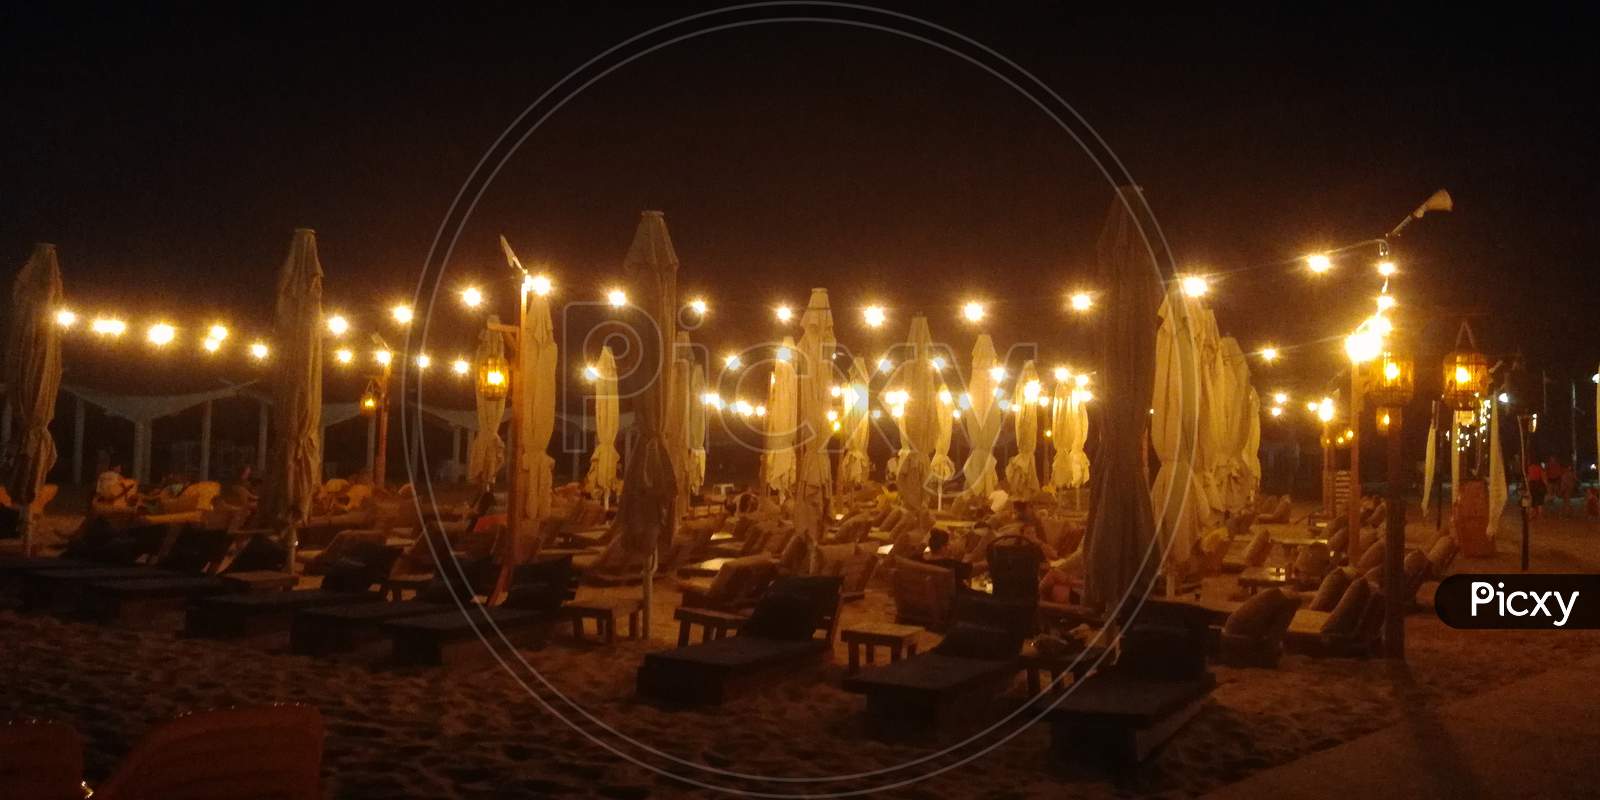 Party Lounge at sea beach, Bars and restaurants at coast area